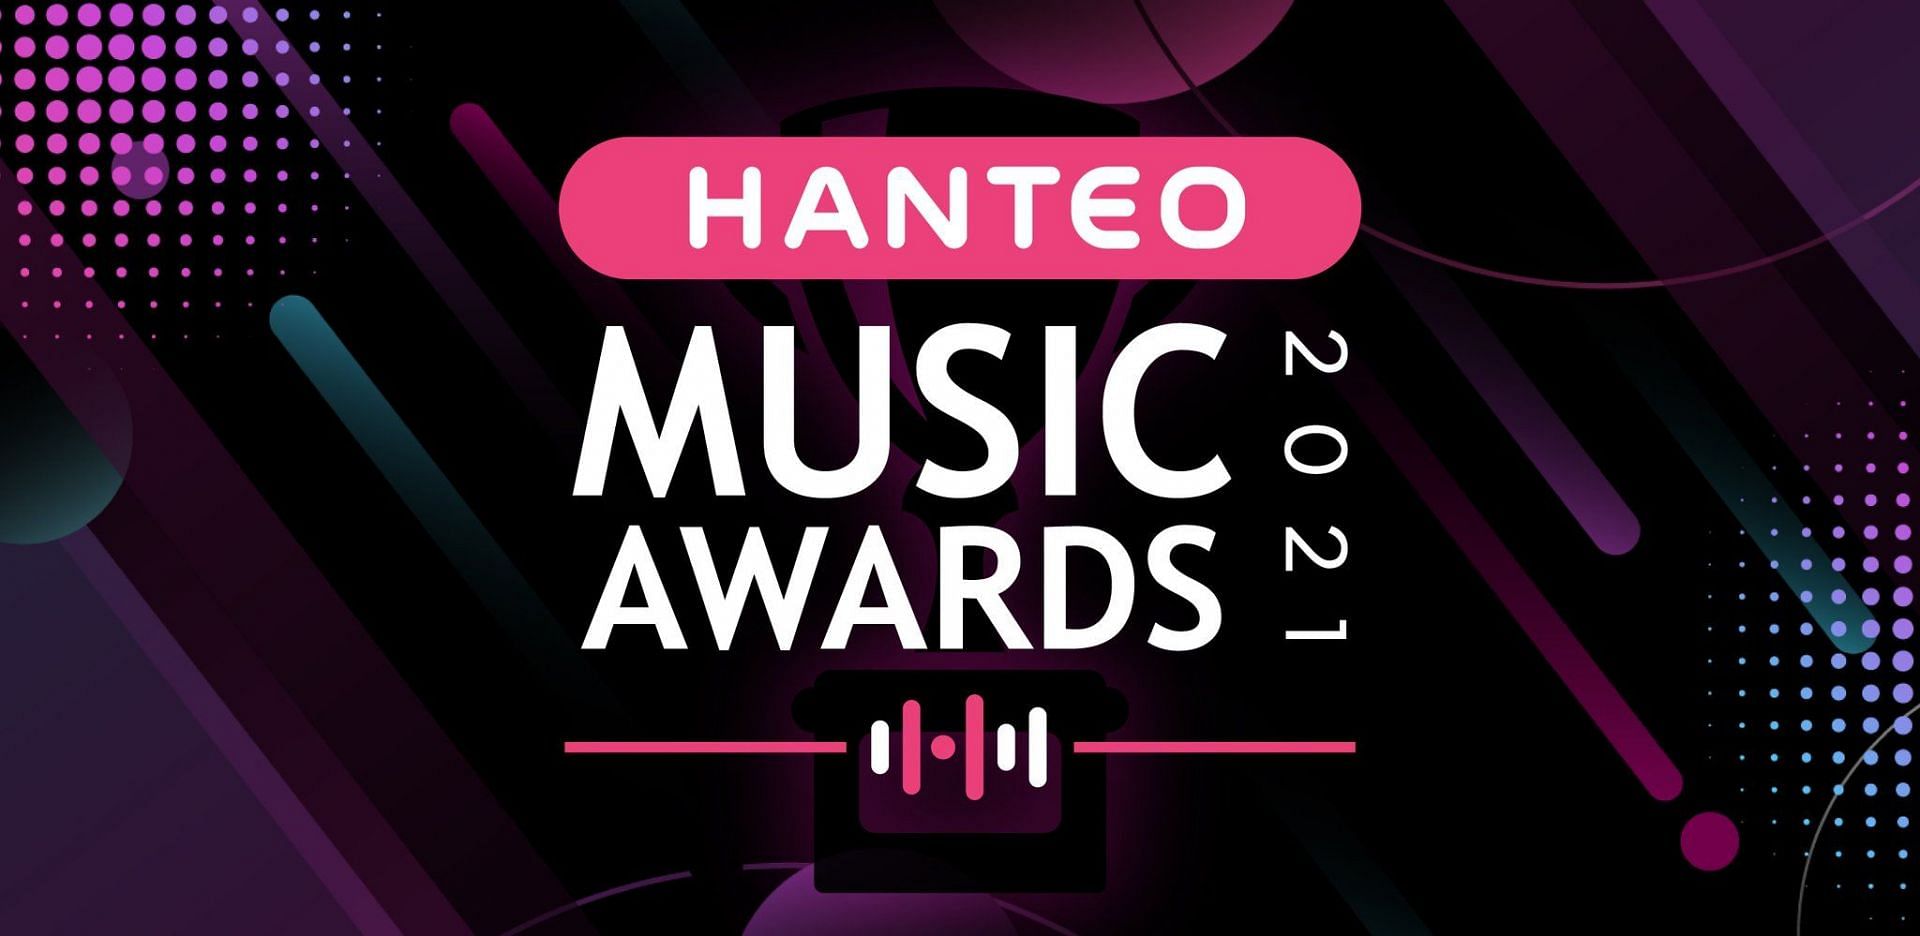 What is the 2021 Hanteo Music Awards all about? Categories and award